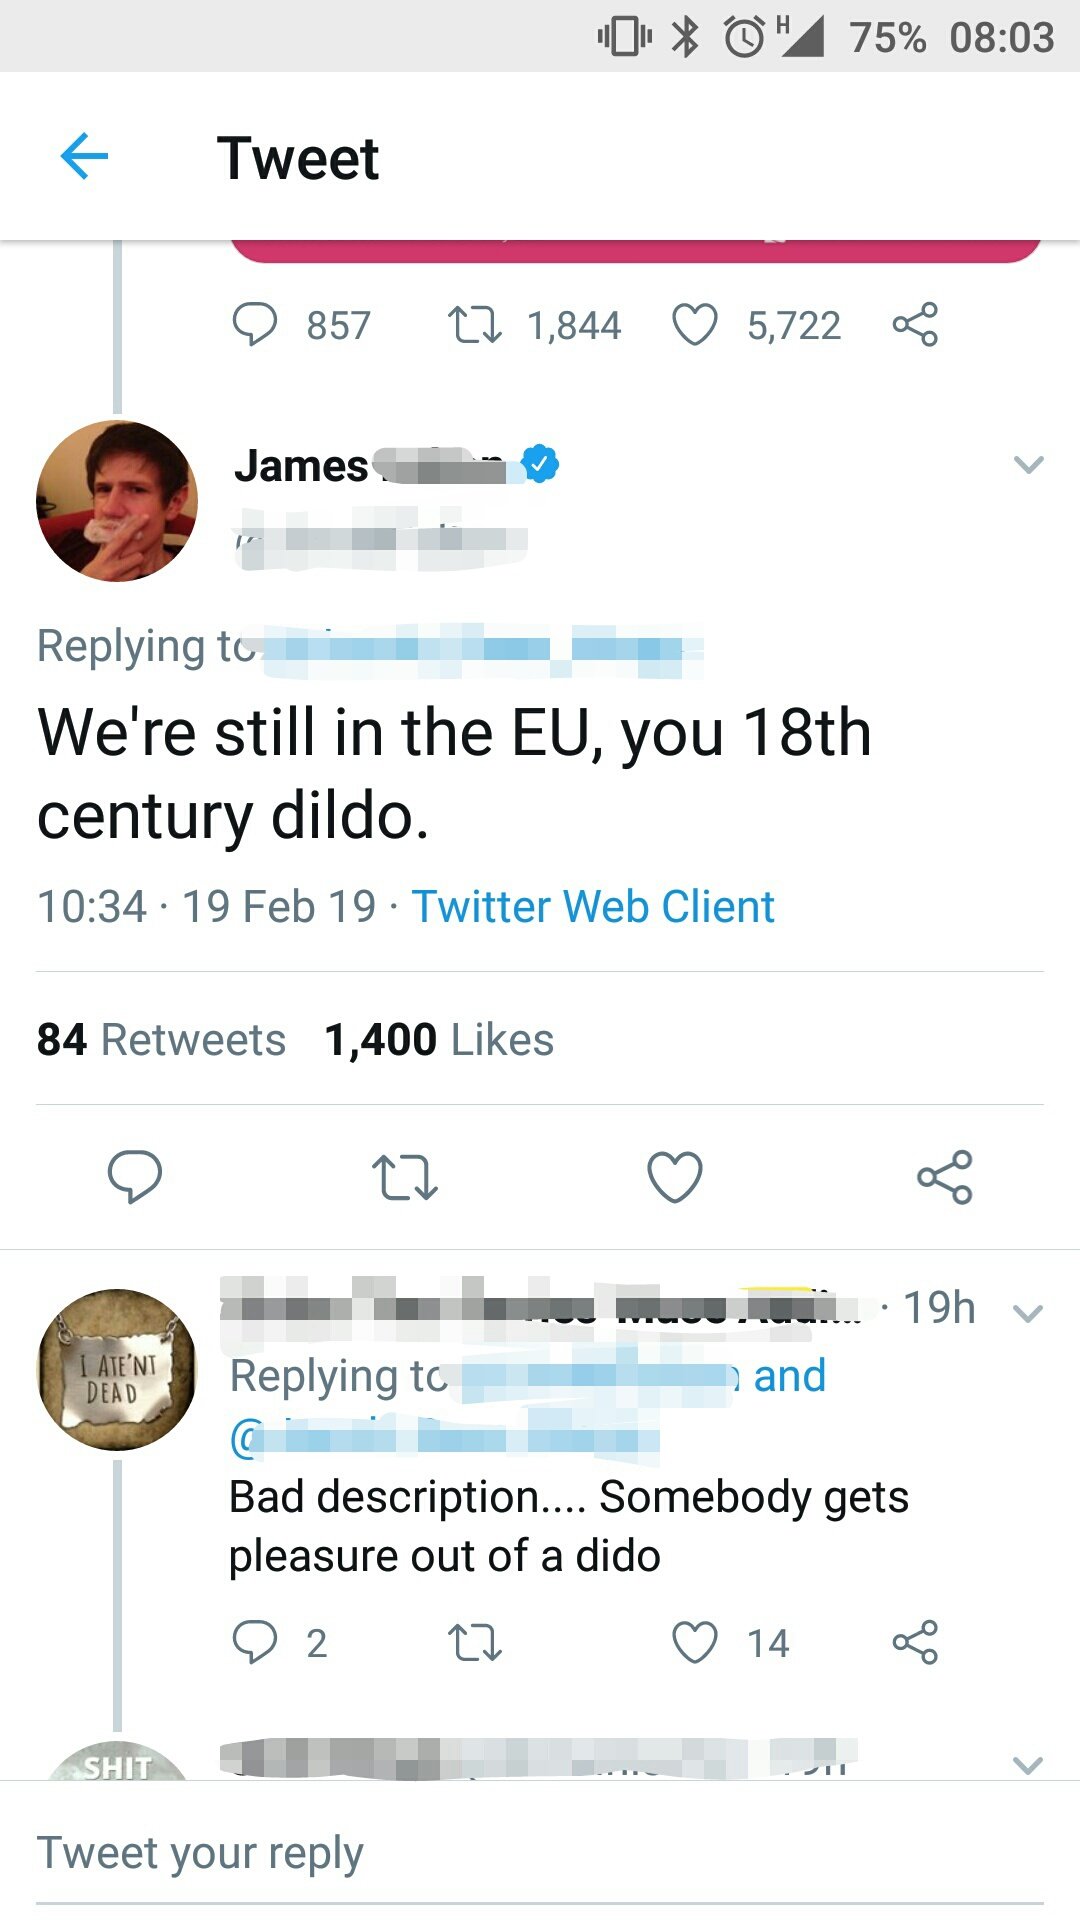 screenshot - % 75% Tweet O 857 22 1,844 5,722 James We're still in the Eu, you 18th century dildo. 19 Feb 19. Twitter Web Client 84 1,400 19h and I Ate'Nt Dead Bad description.... Somebody gets pleasure out of a dido 02 22 14 8 Shit Tweet your